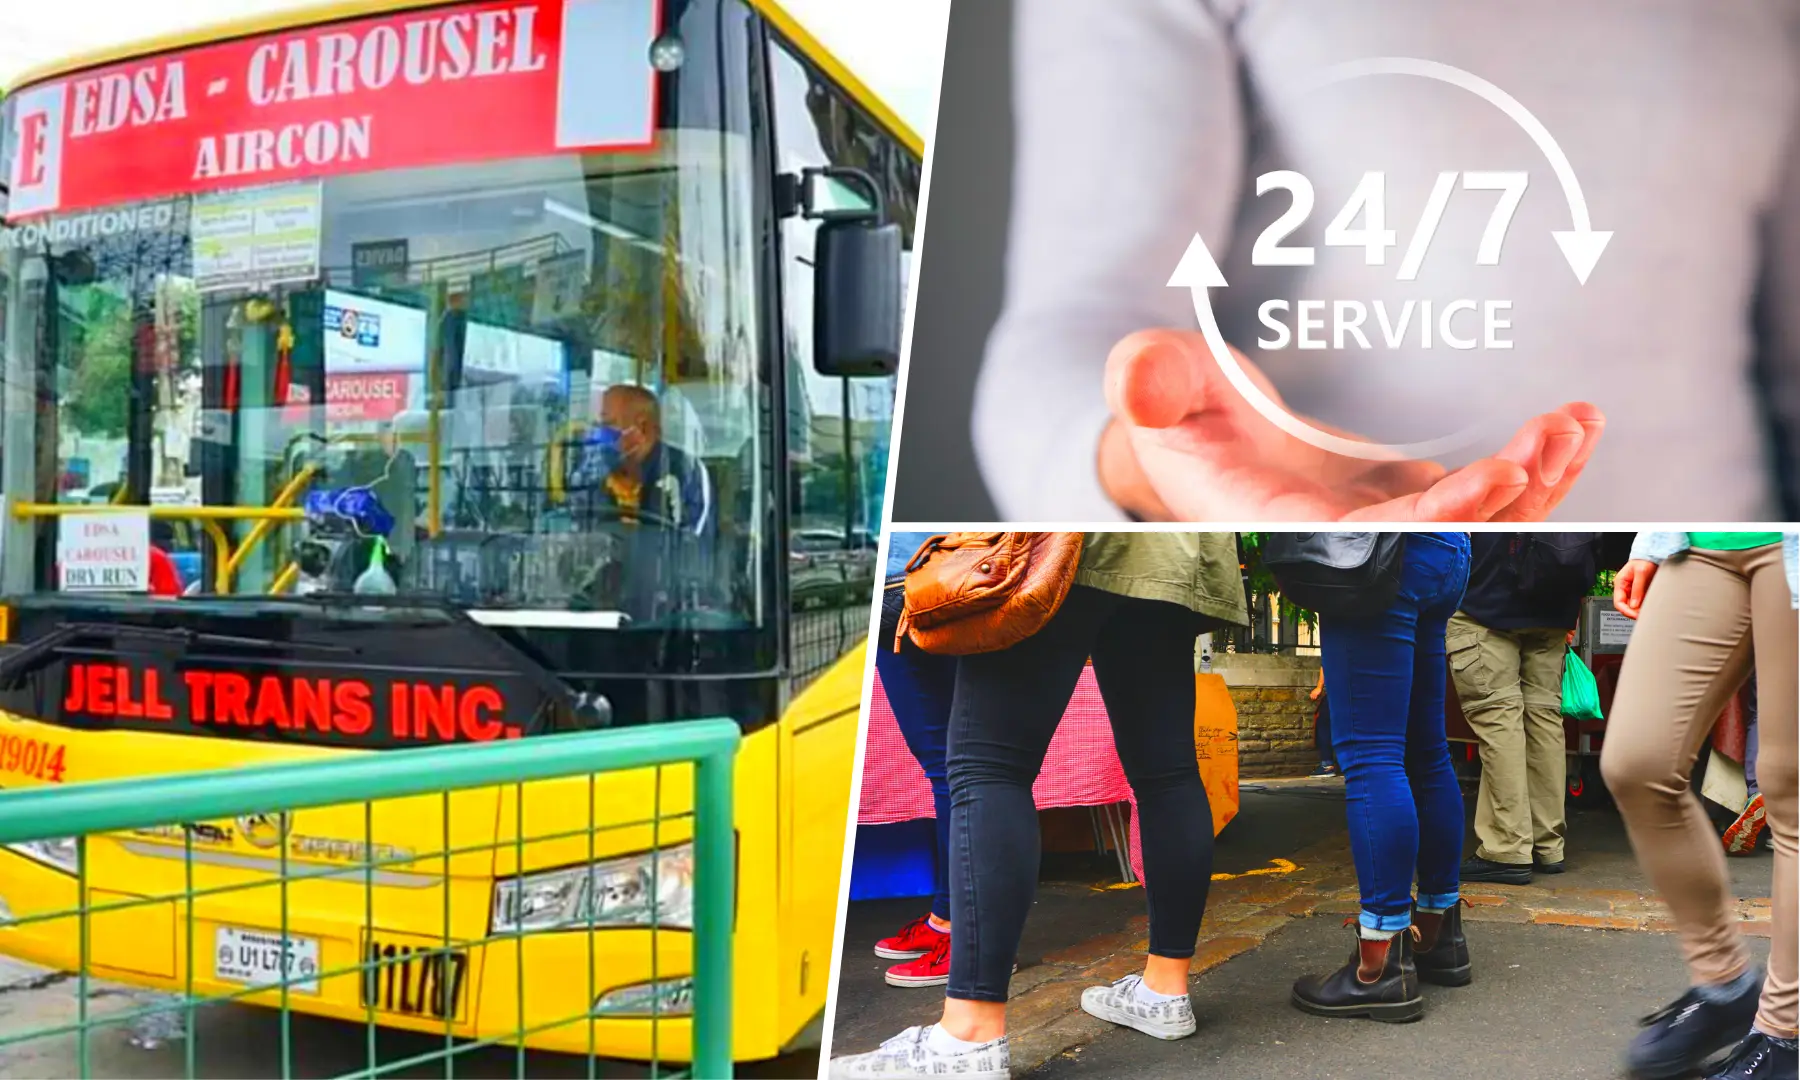 EDSA Carousel Bus Free Ride Starts a 247 Operation this December 1